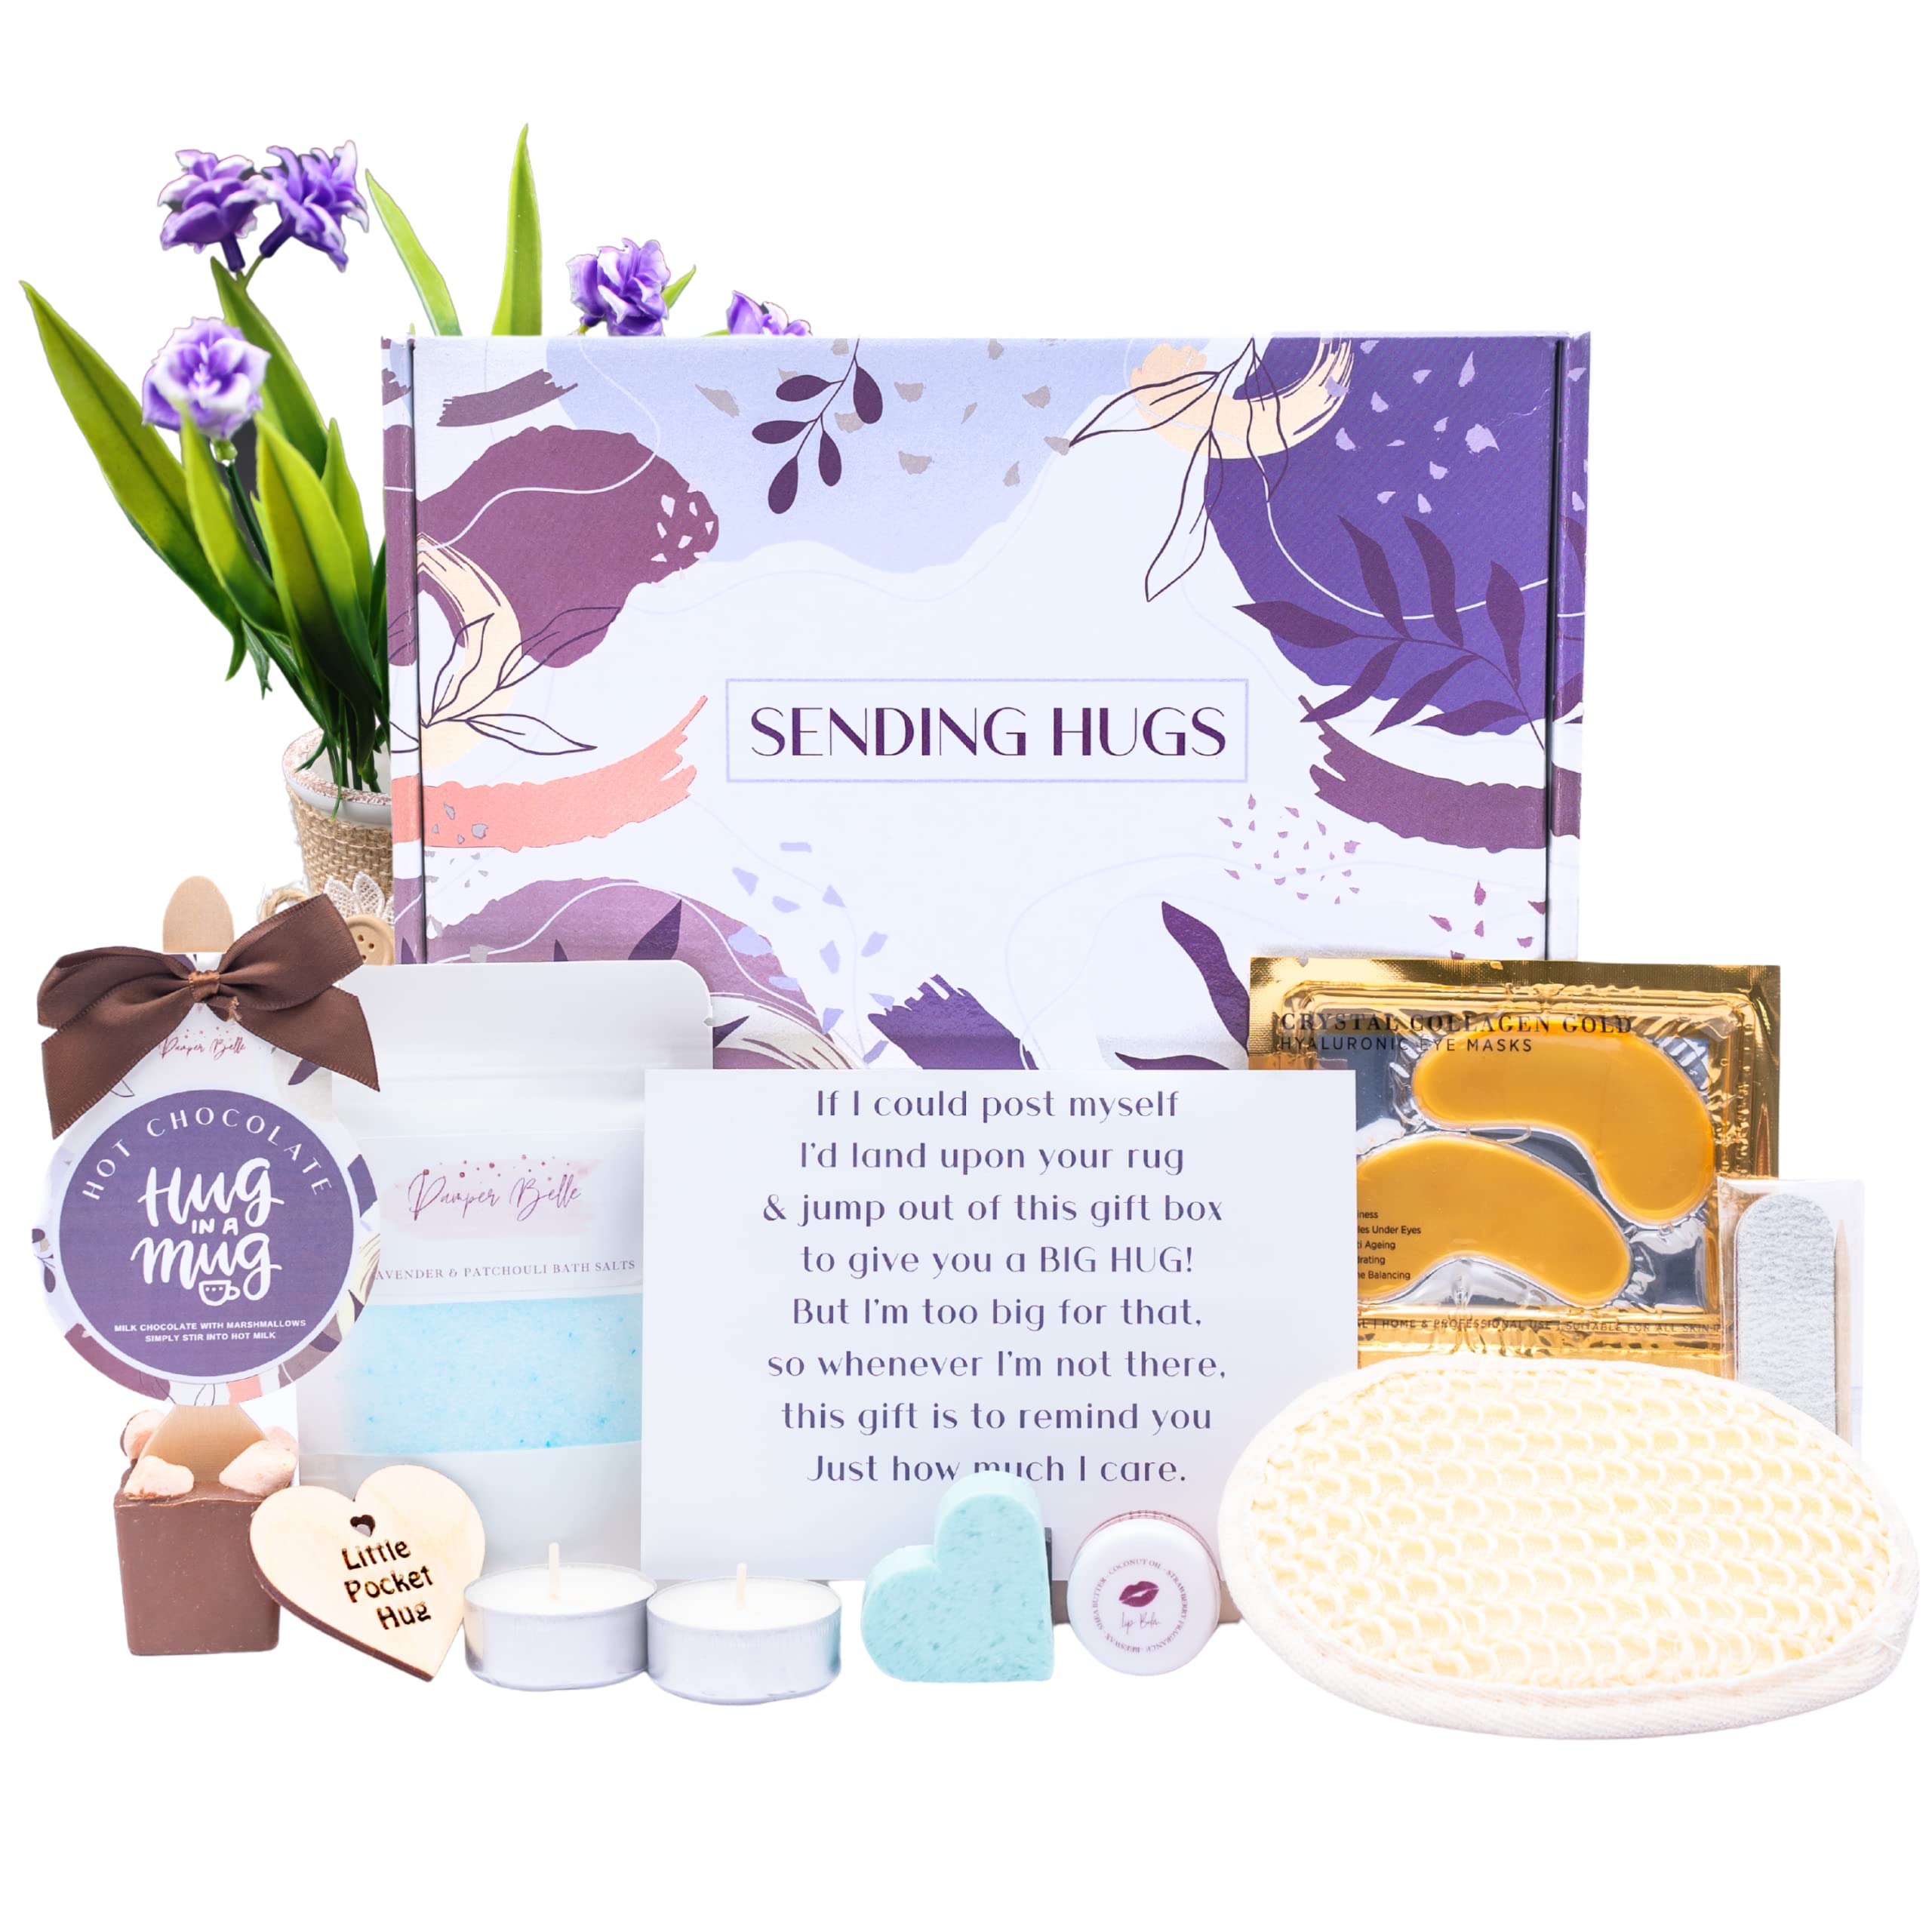 Hug in a box Care Package Pamper Gift Set for women with Pocket Hug token & Bath set for a Relaxation Spa day at home. Great thinking of you gift idea